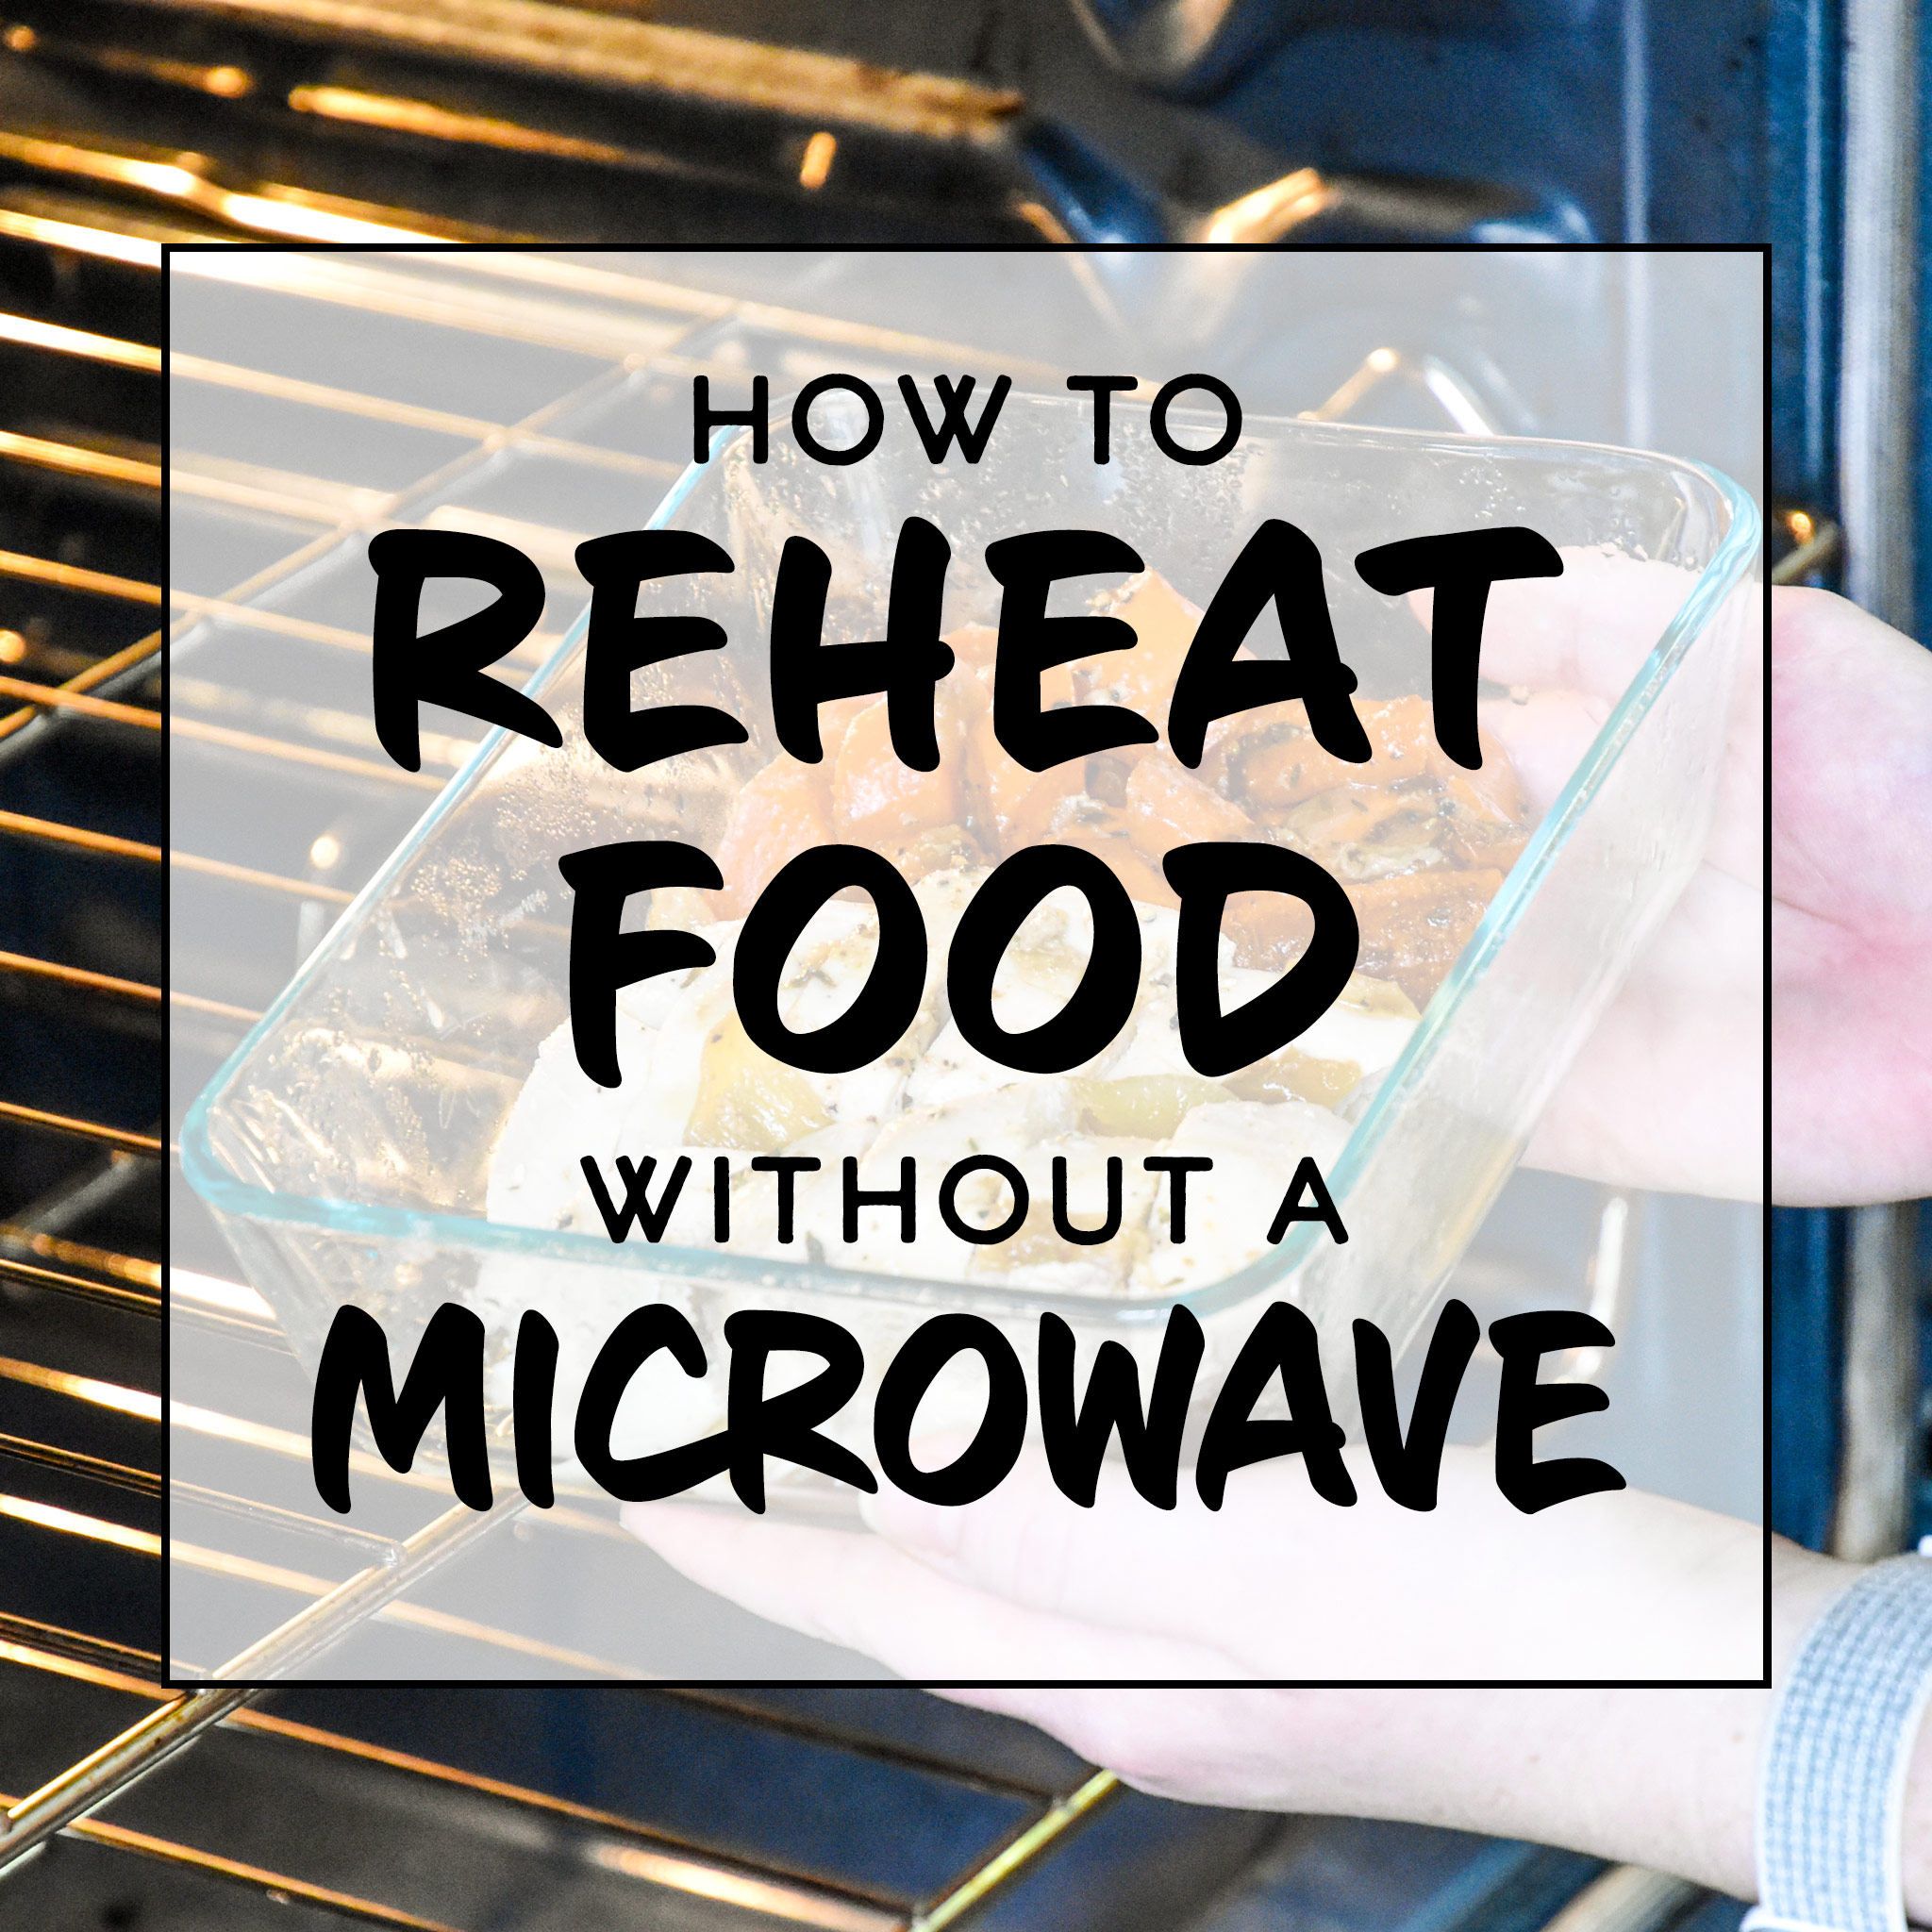 cover for how to reheat food without a microwave with text.